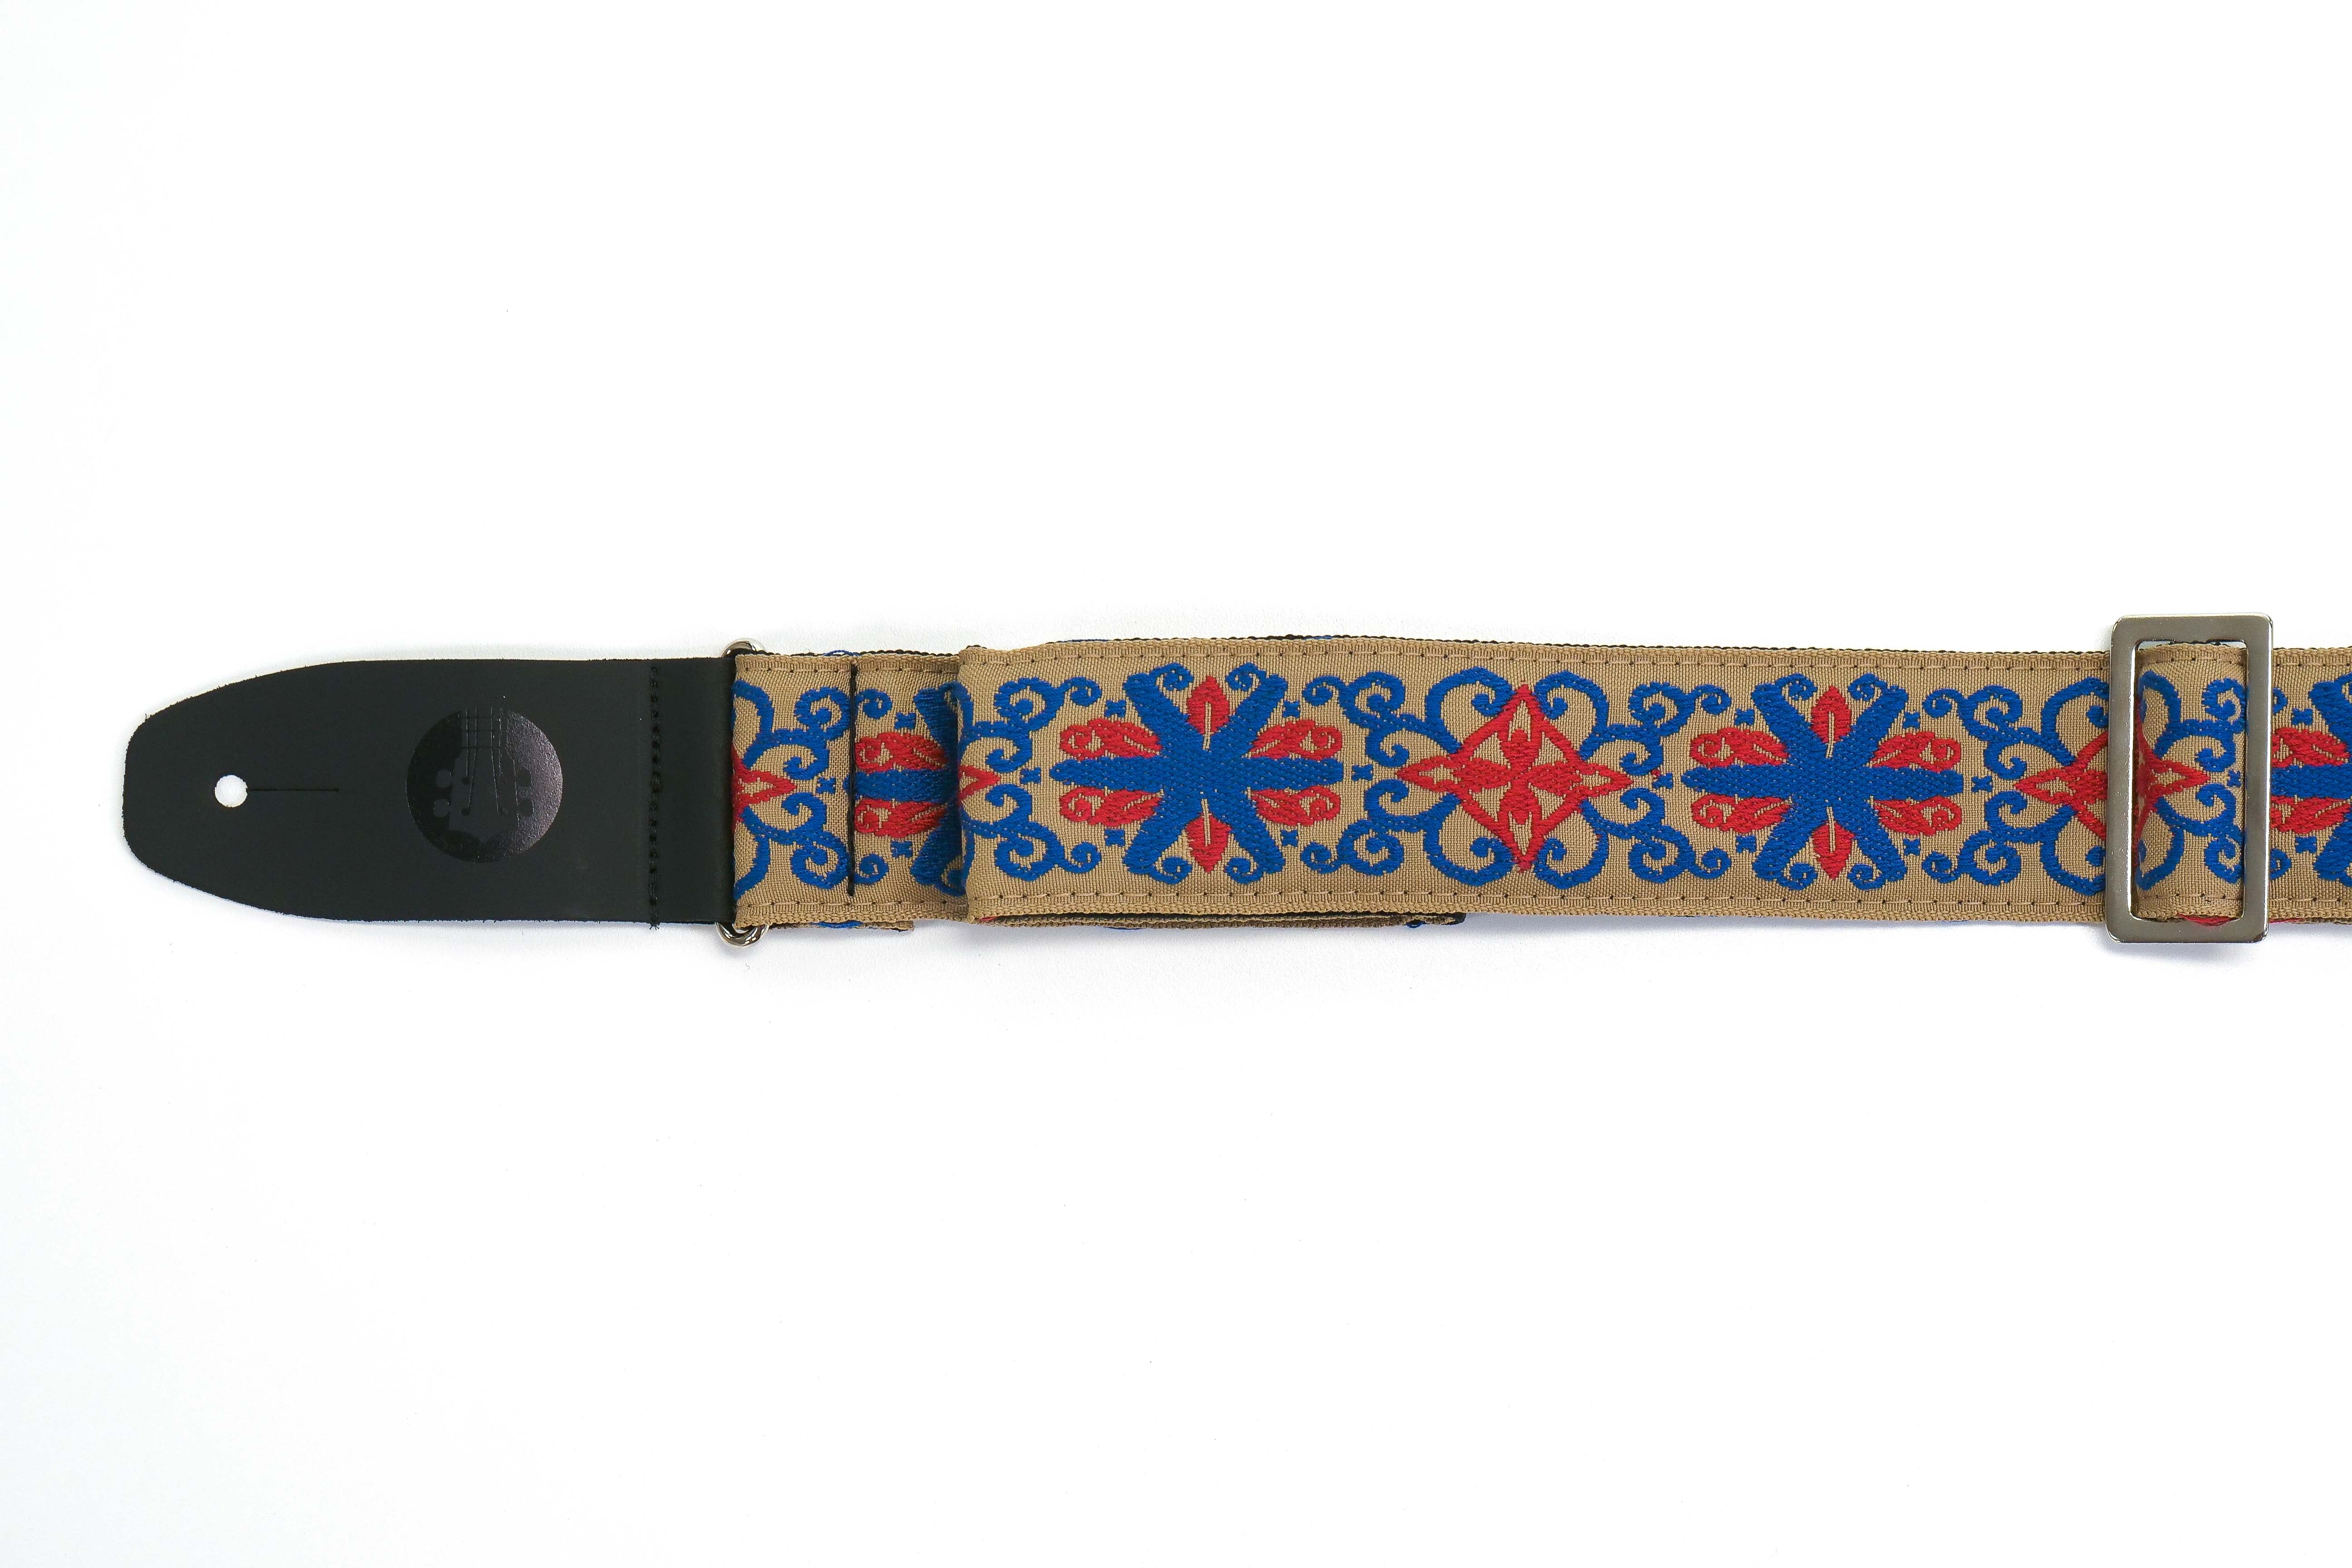 Terry Carter Music Store 2 Inch Deluxe Jacquard Guitar and Ukulele Strap -  BLUE/RED WITH BLUE SPINNER